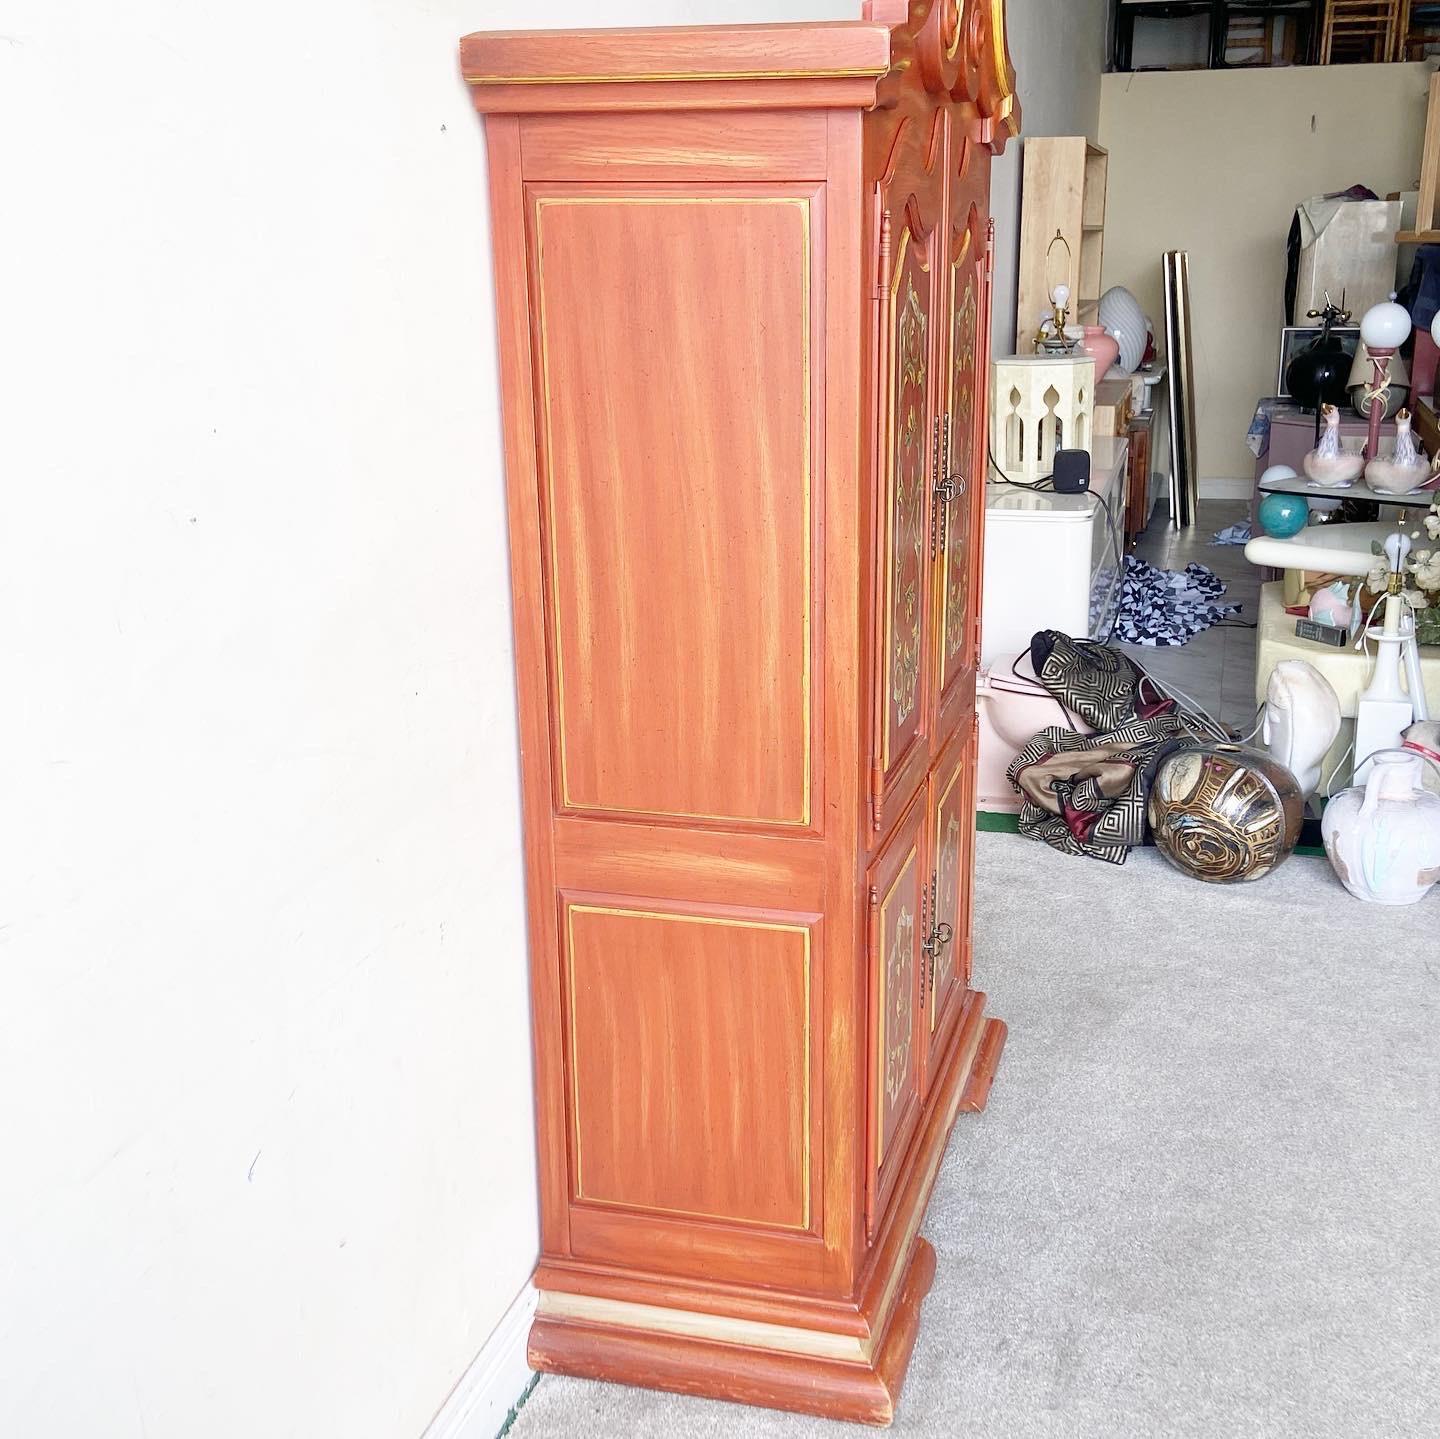 Exceptional rustic armoire by Thomasville marked 1971. Features a painted red distressed over a gold.
   